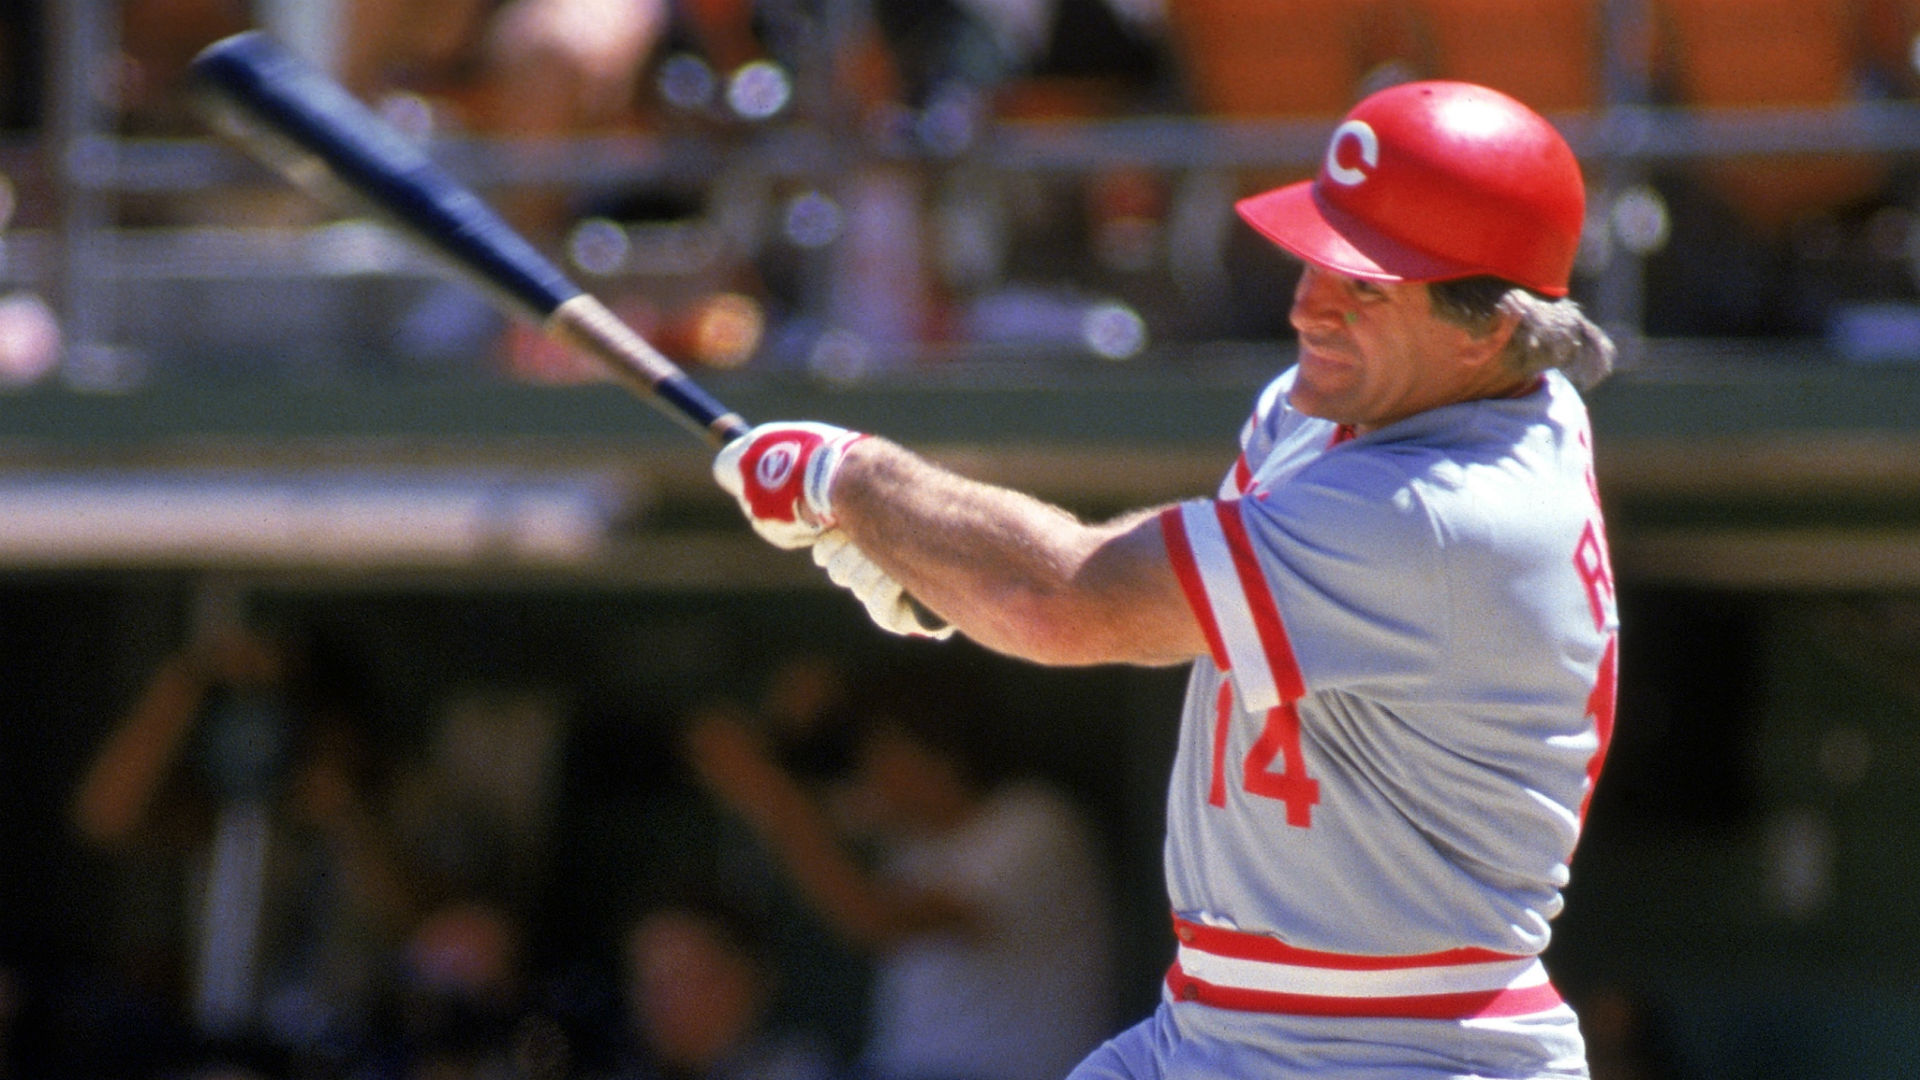 Pete Rose bet on baseball as a player, newly released notebook appears to show